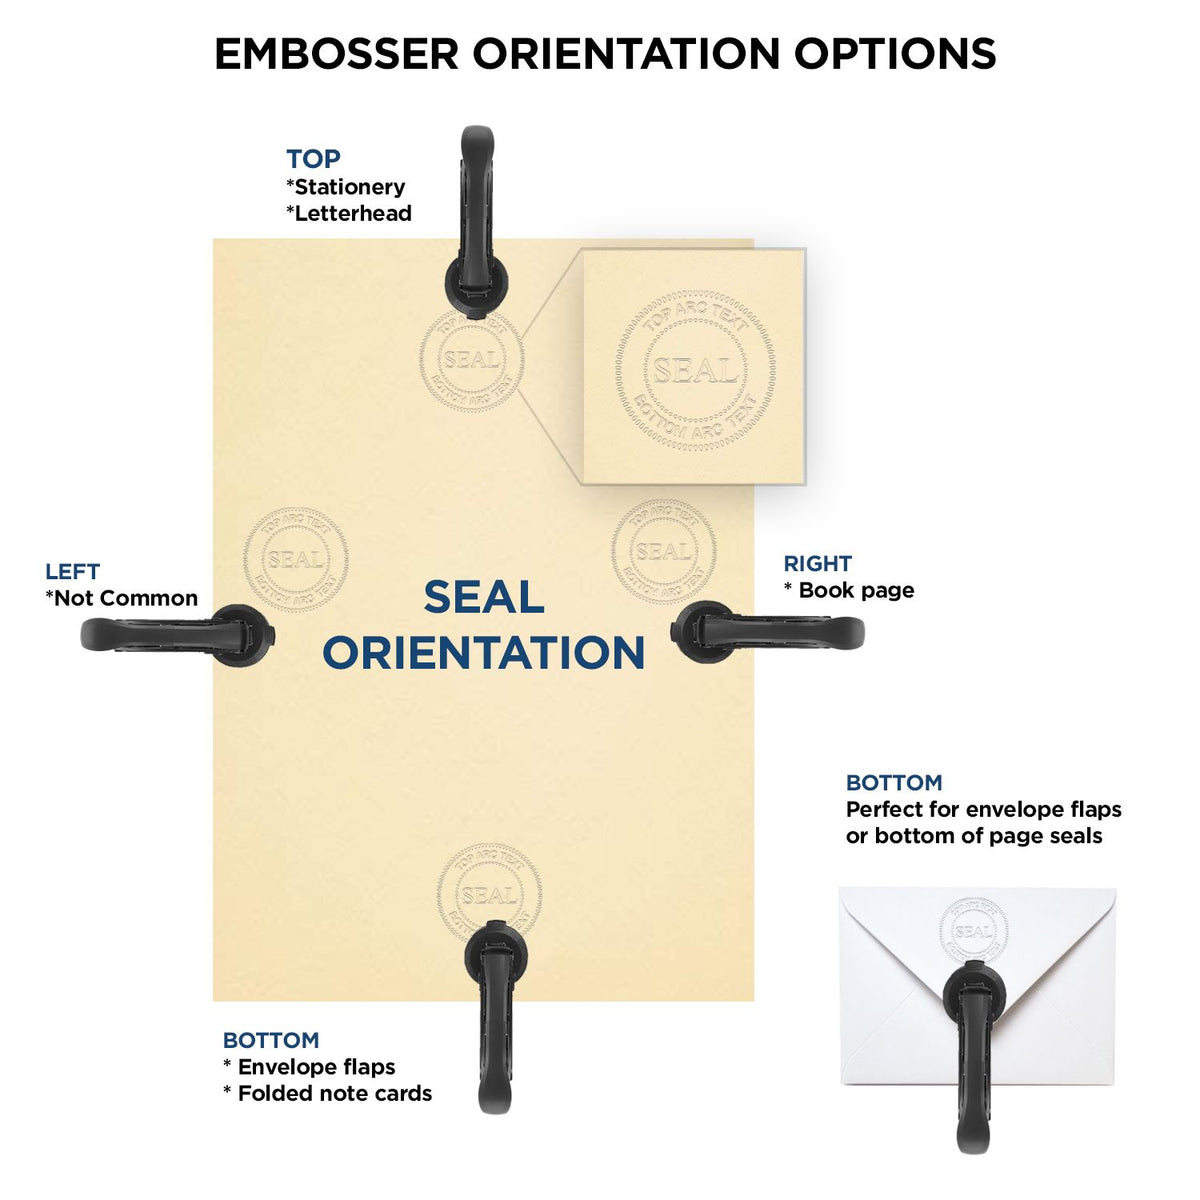 An infographic for the Extended Long Reach Mississippi Surveyor Embosser showing embosser orientation, this is showing examples of a top, bottom, right and left insert.